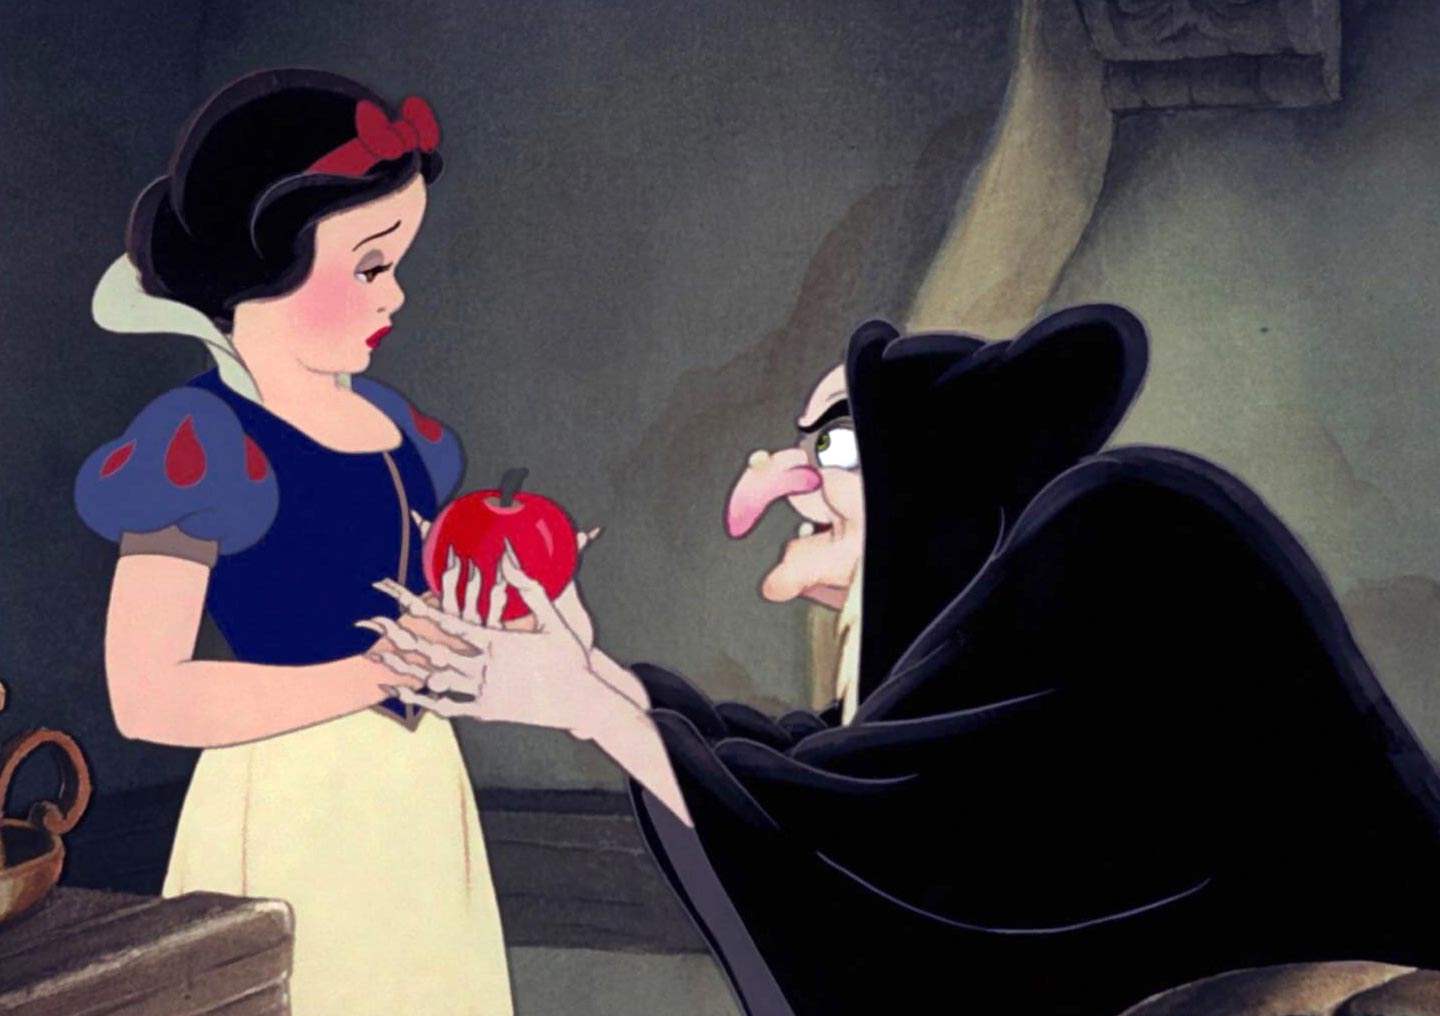 The old witch is offering a poisoned apple to Snow White